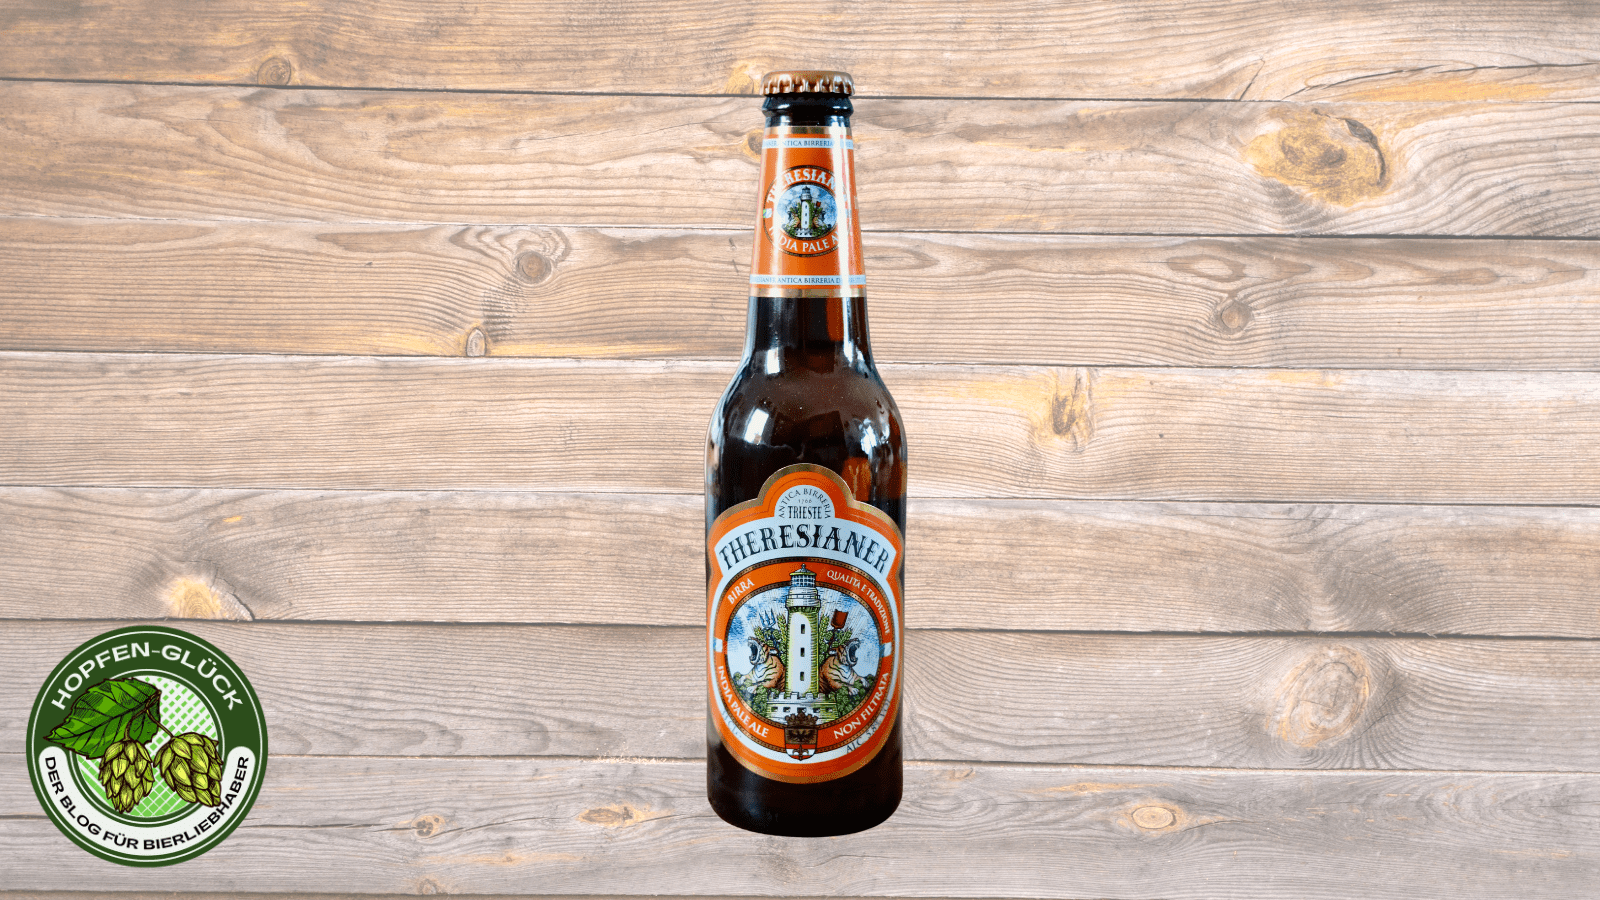 Theresianer India Pale Ale